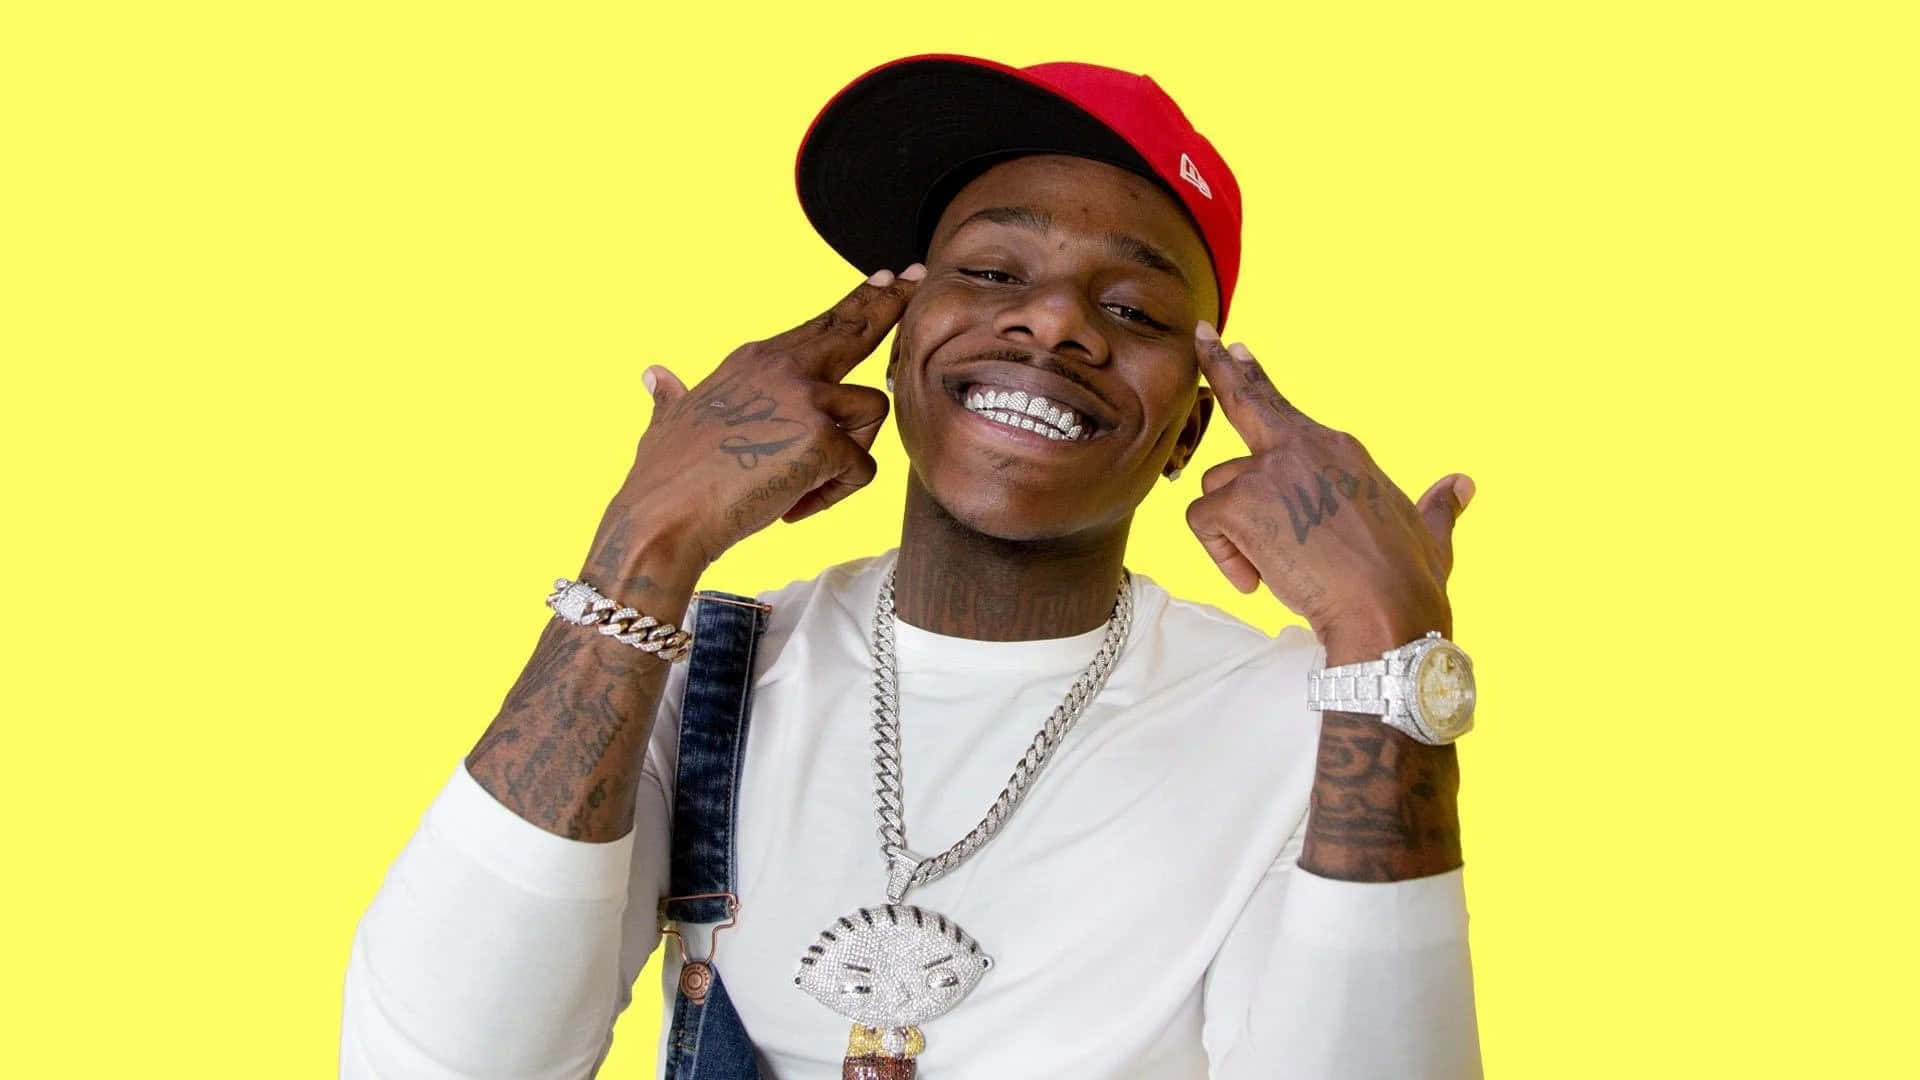 DaBaby in Concert - Dynamic Performance Shot